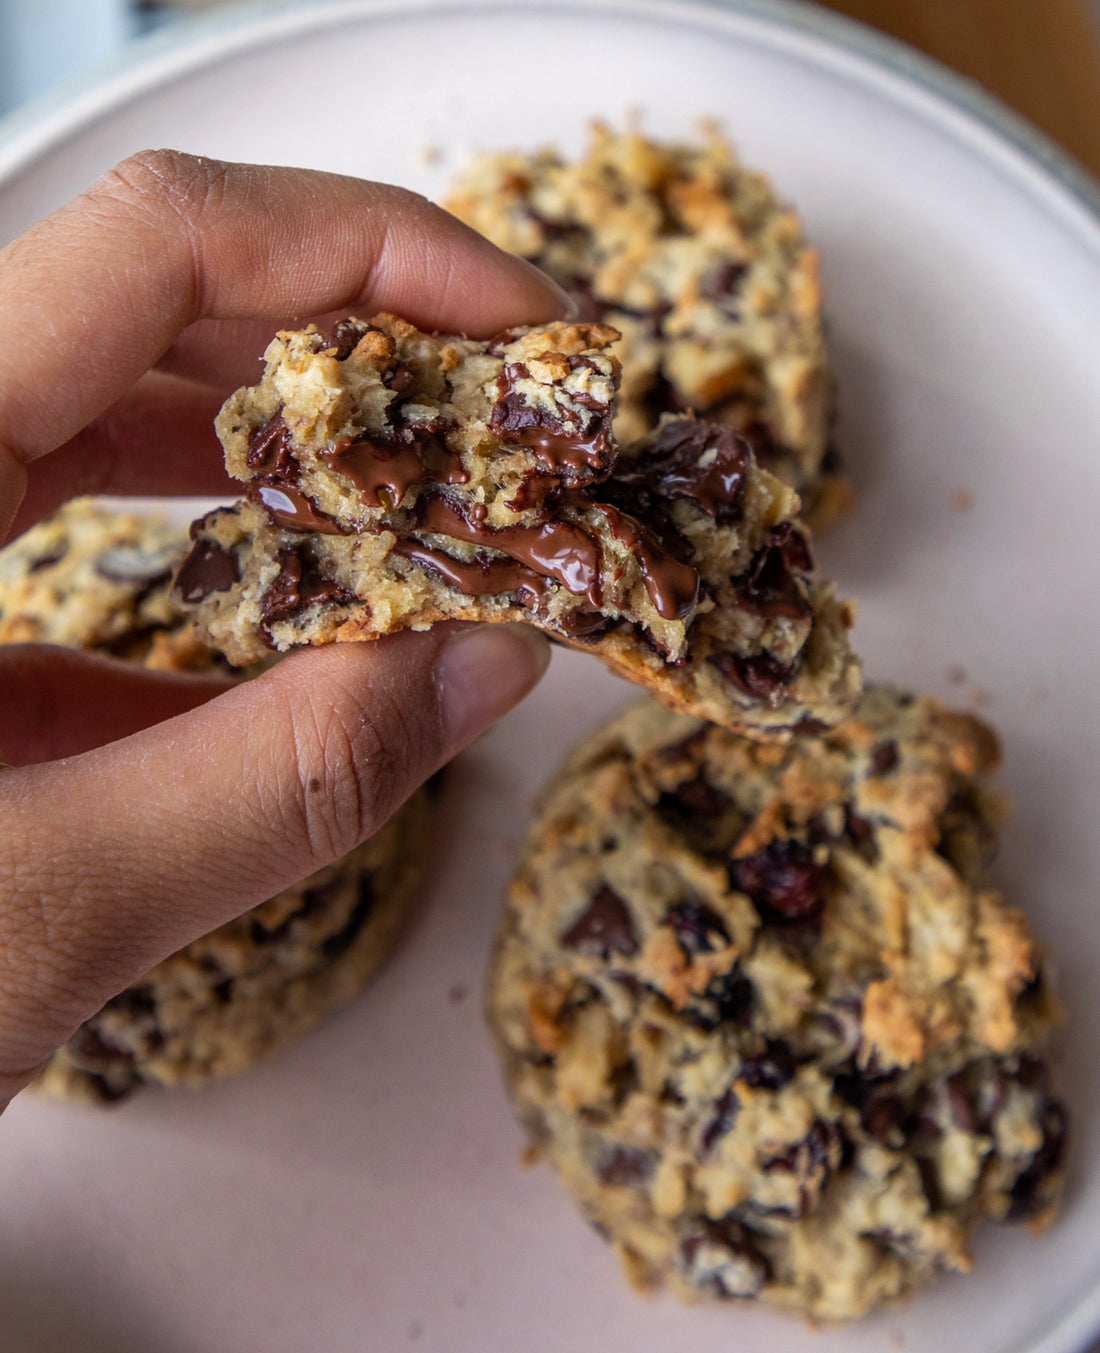 Lactation cookies: Why are they so good for you?